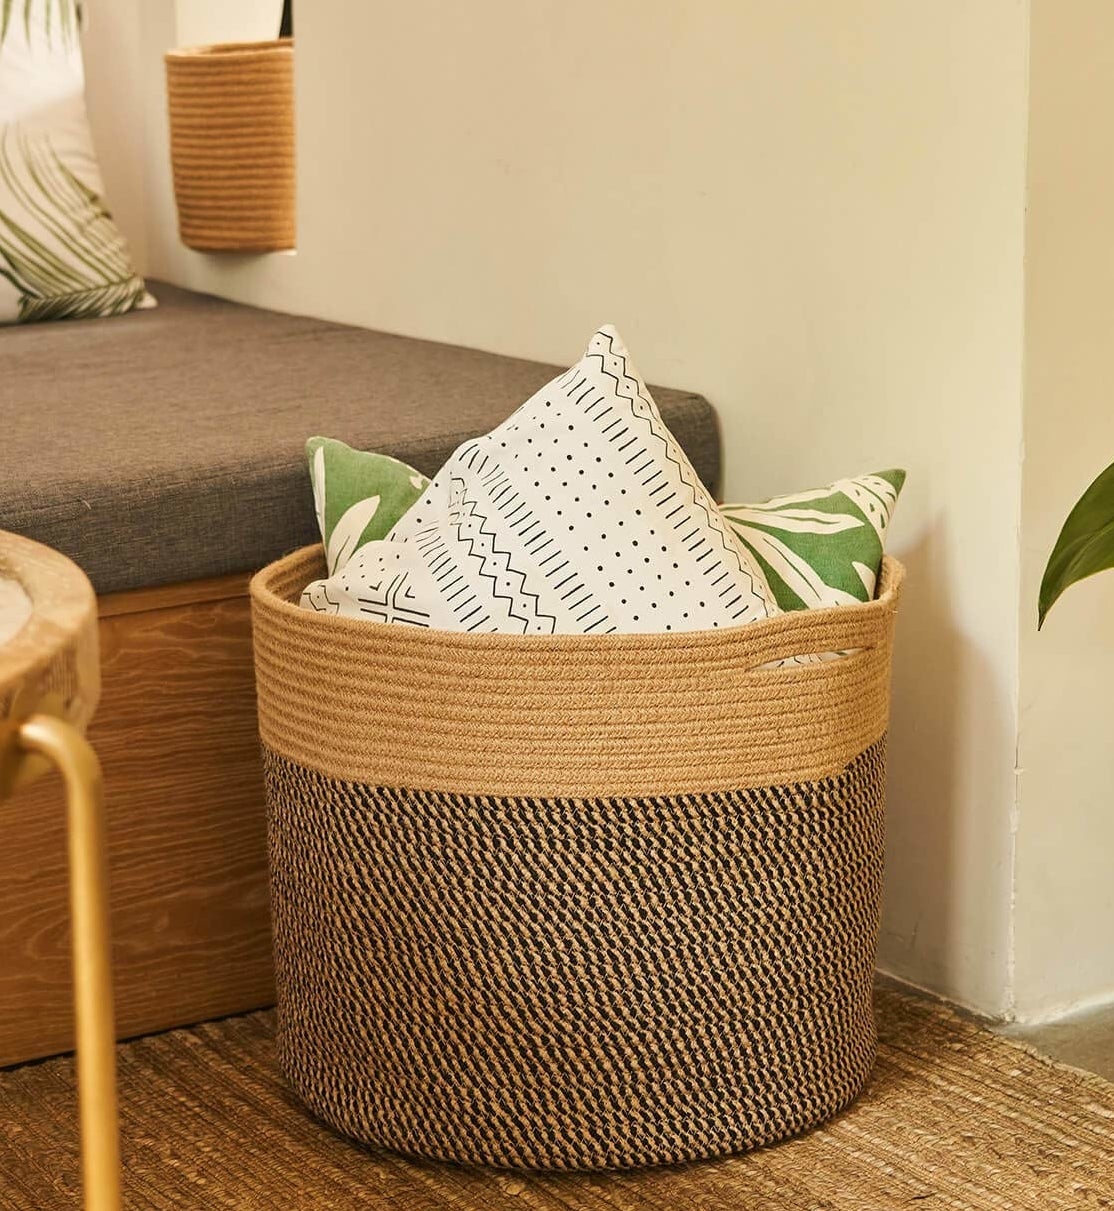 The black and jute basket